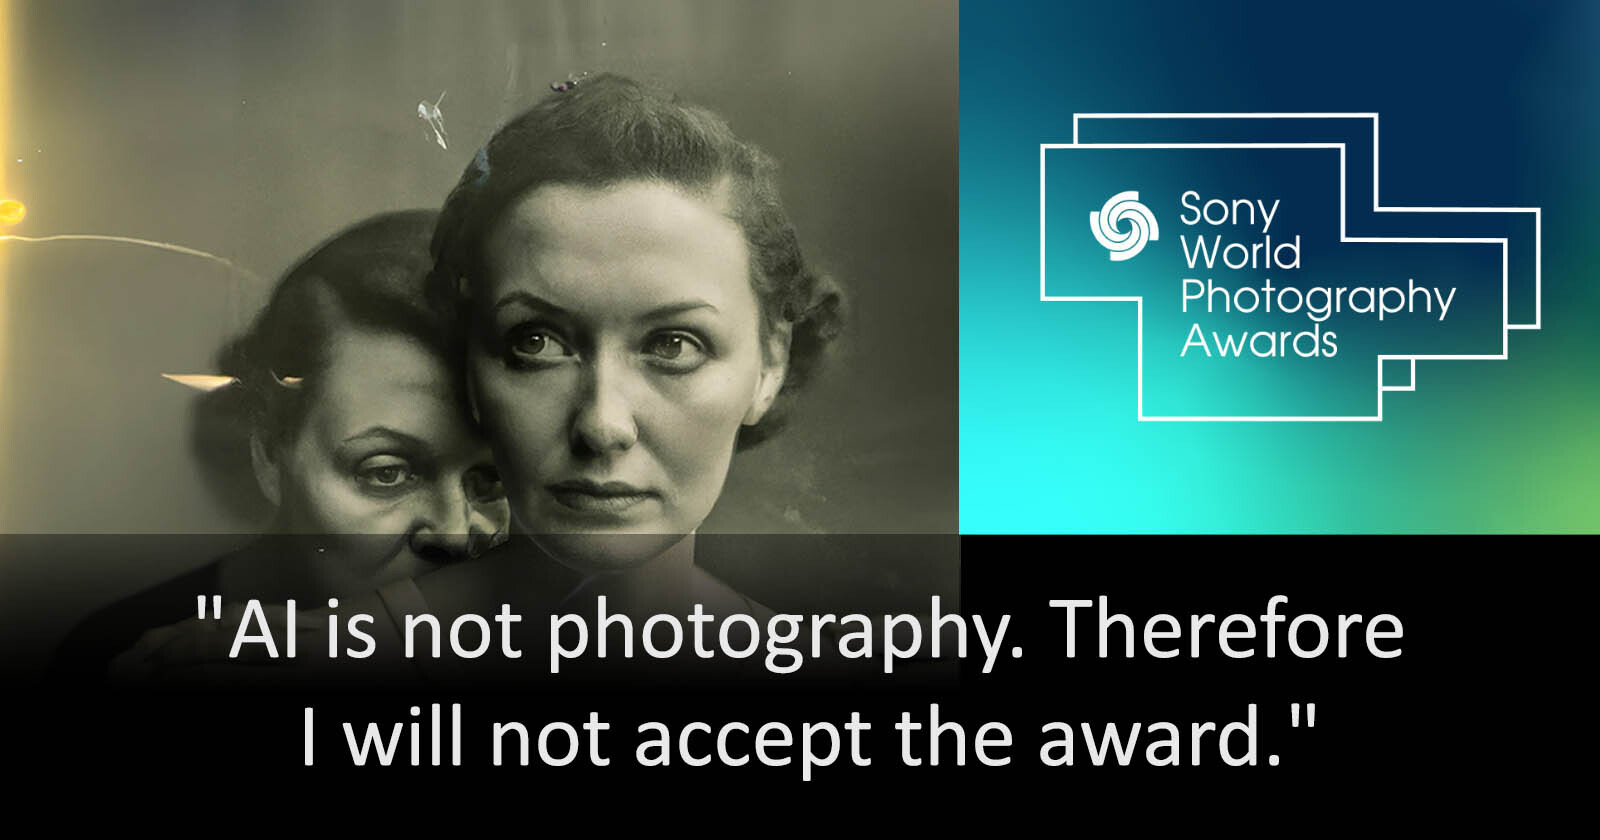 Artist Refuses Prize After His AI Image Wins at Top Photo Contest